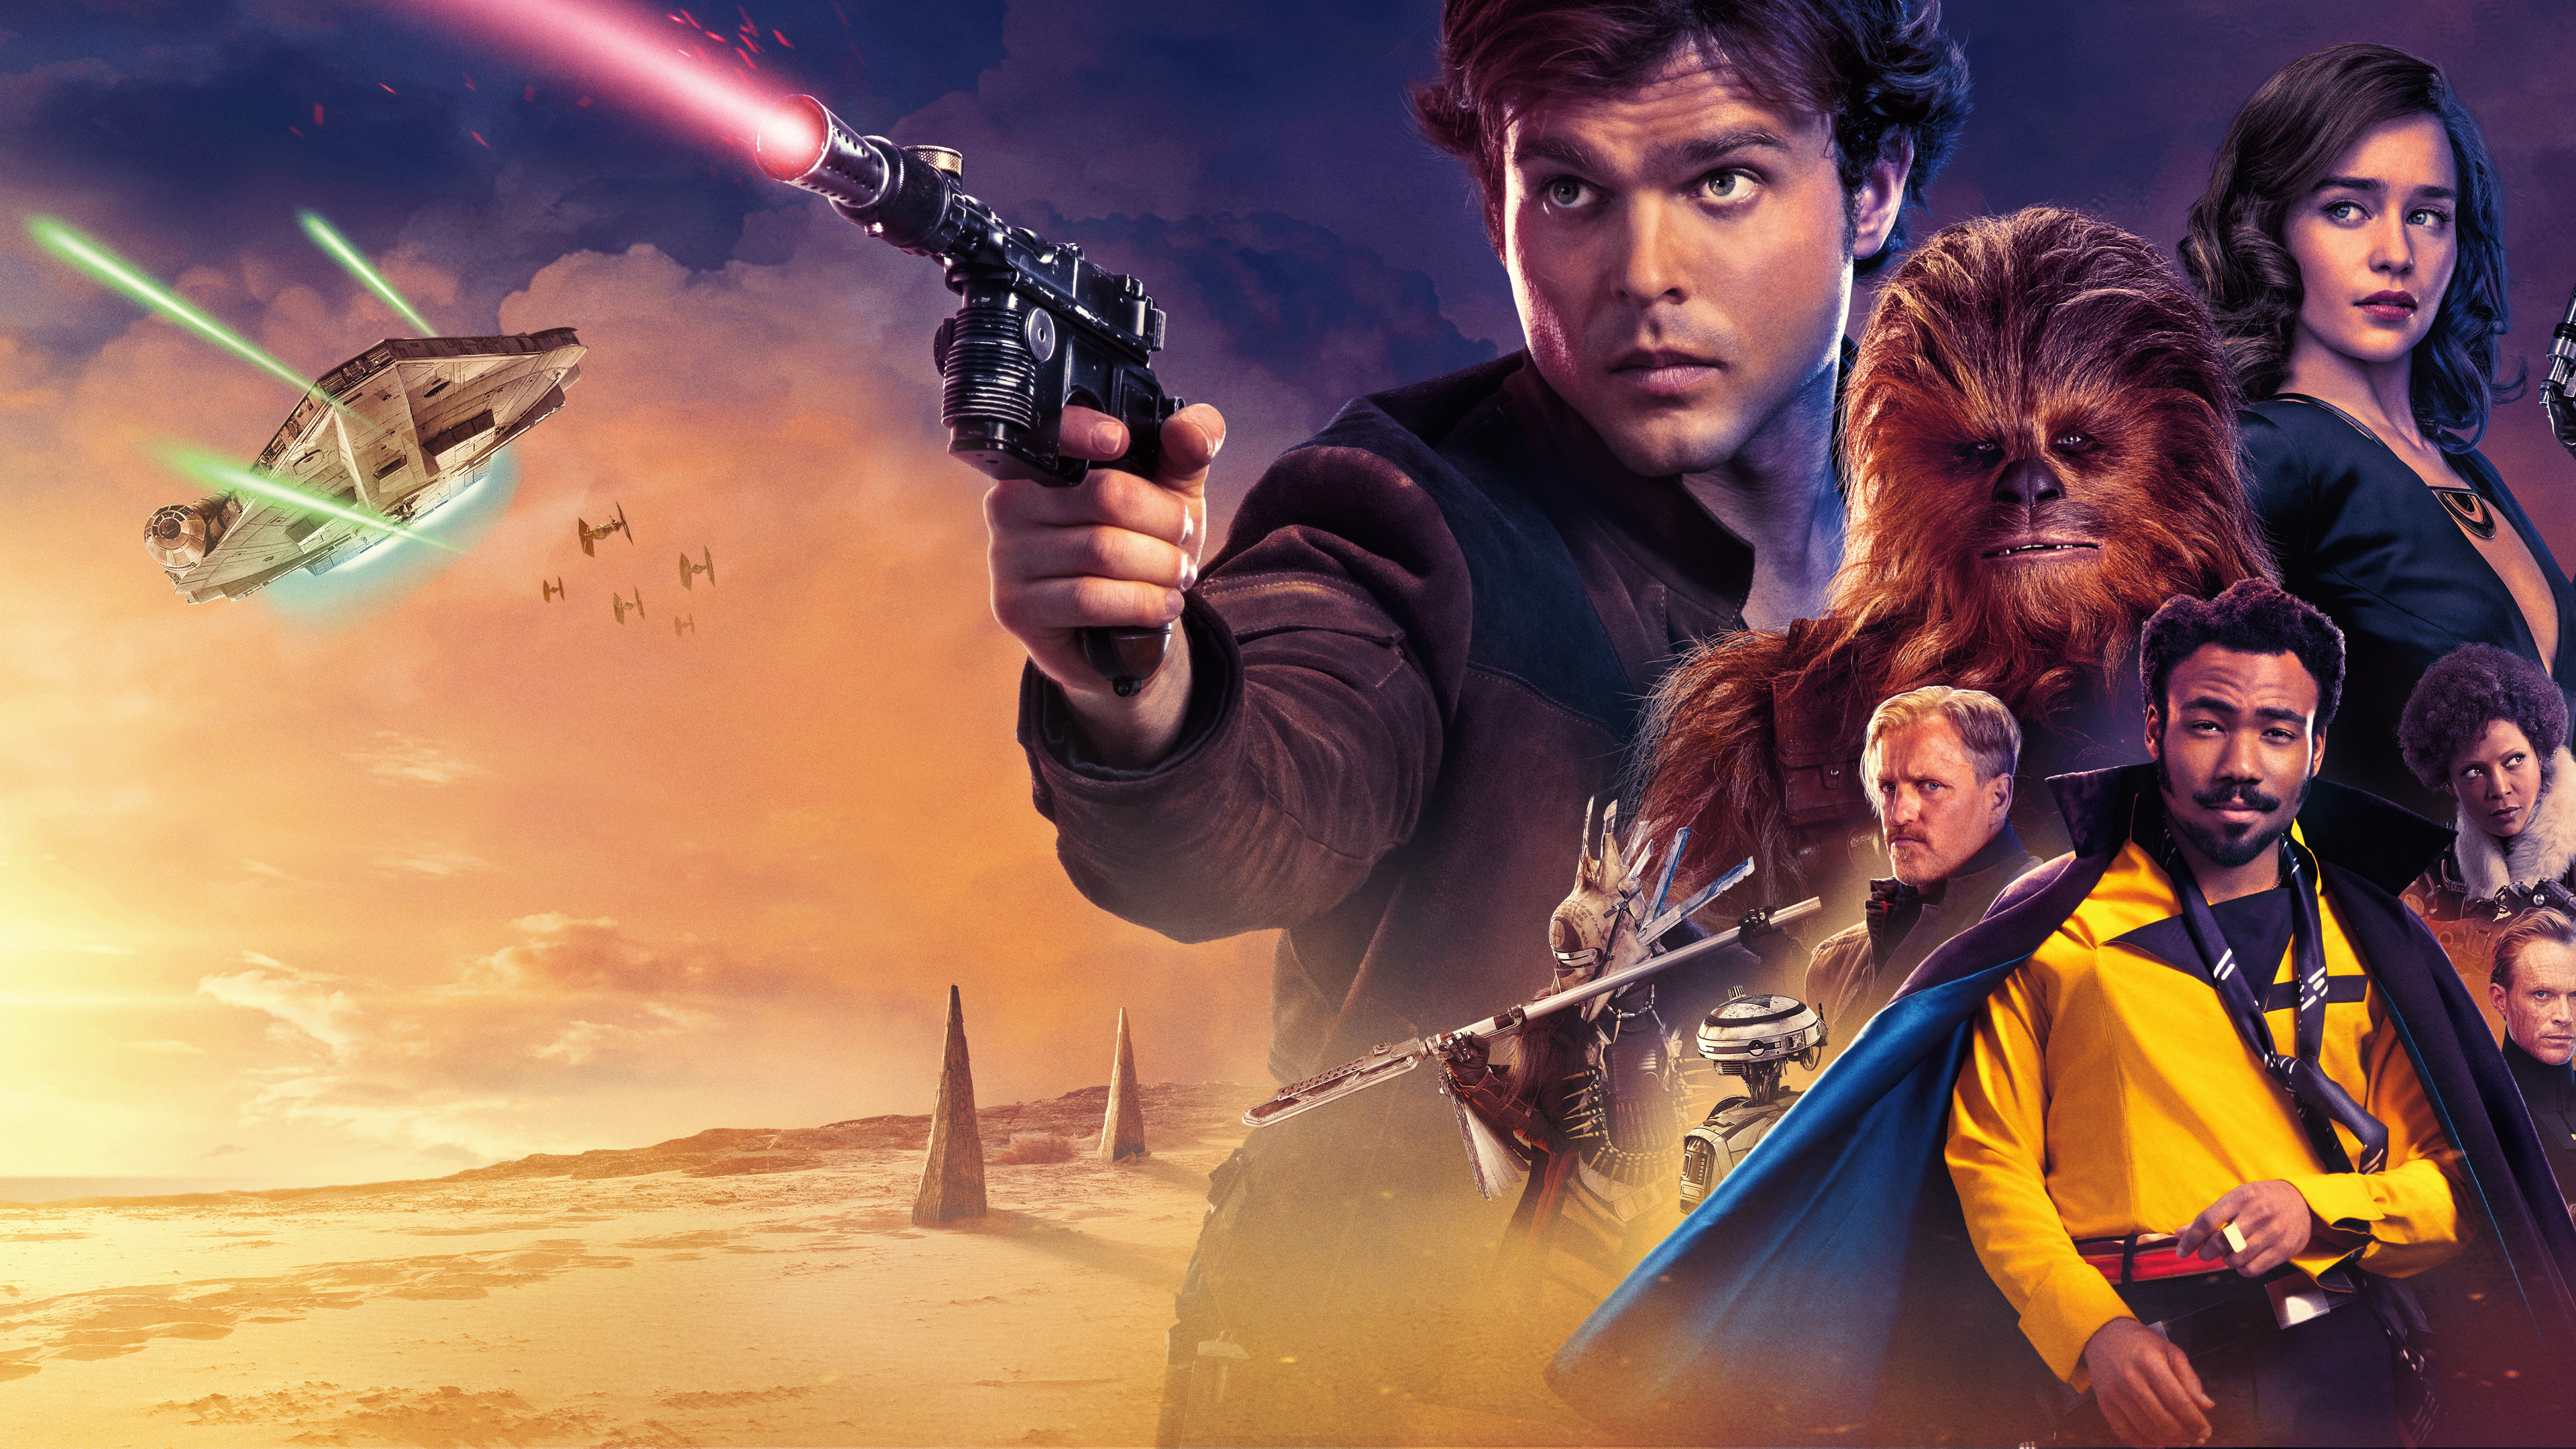 People 3840x2160 movie poster action movie Star Wars Han Solo Chewbacca movies actor actress Solo: A Star Wars Story Lando Calrissian